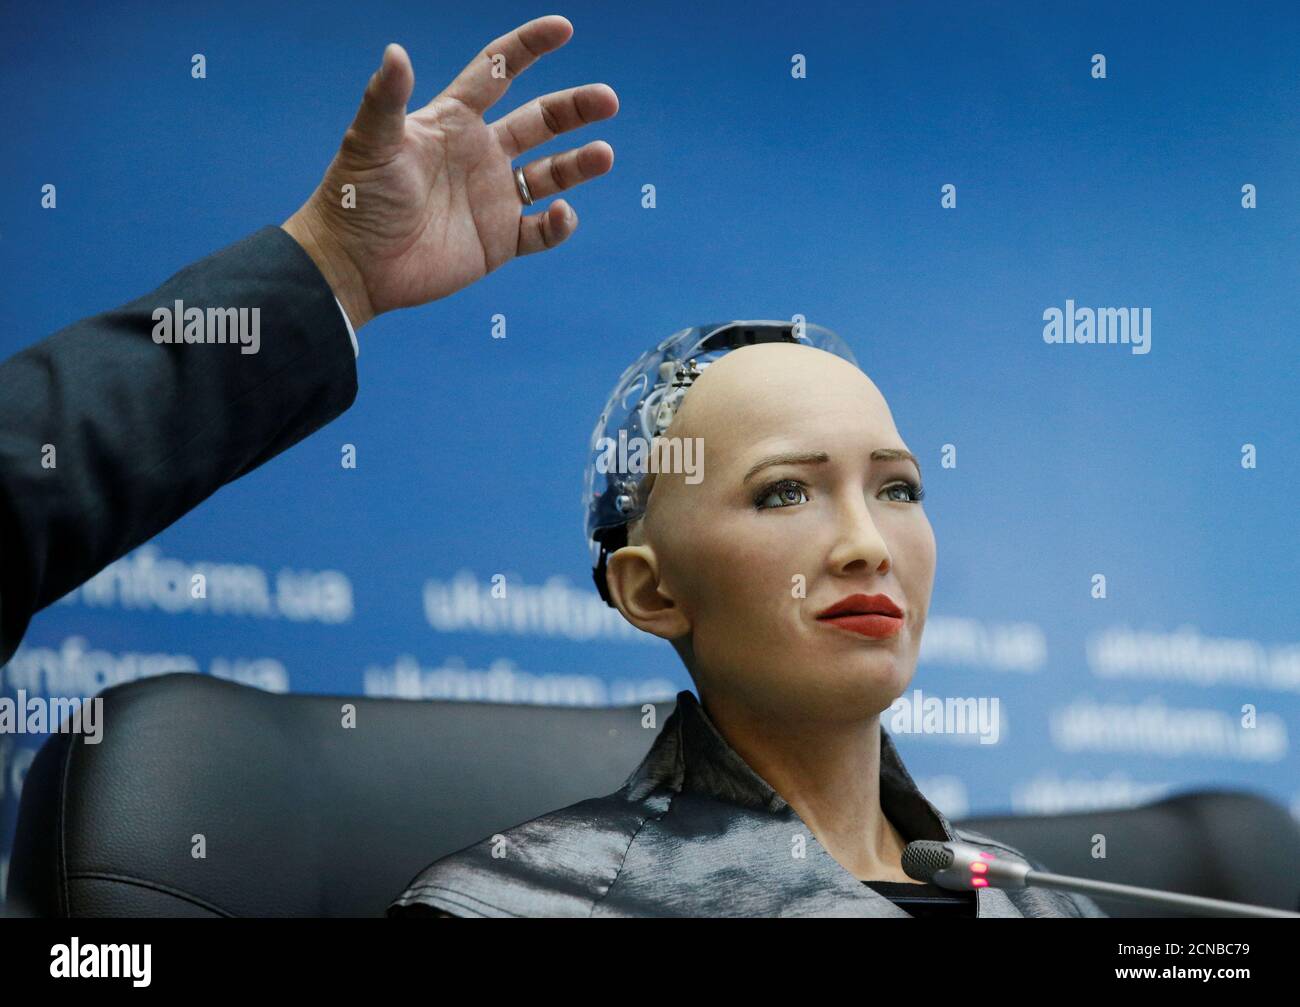 Social humanoid robot Sophia, a latest creation by Hanson Robotics company,  attends a news conference after